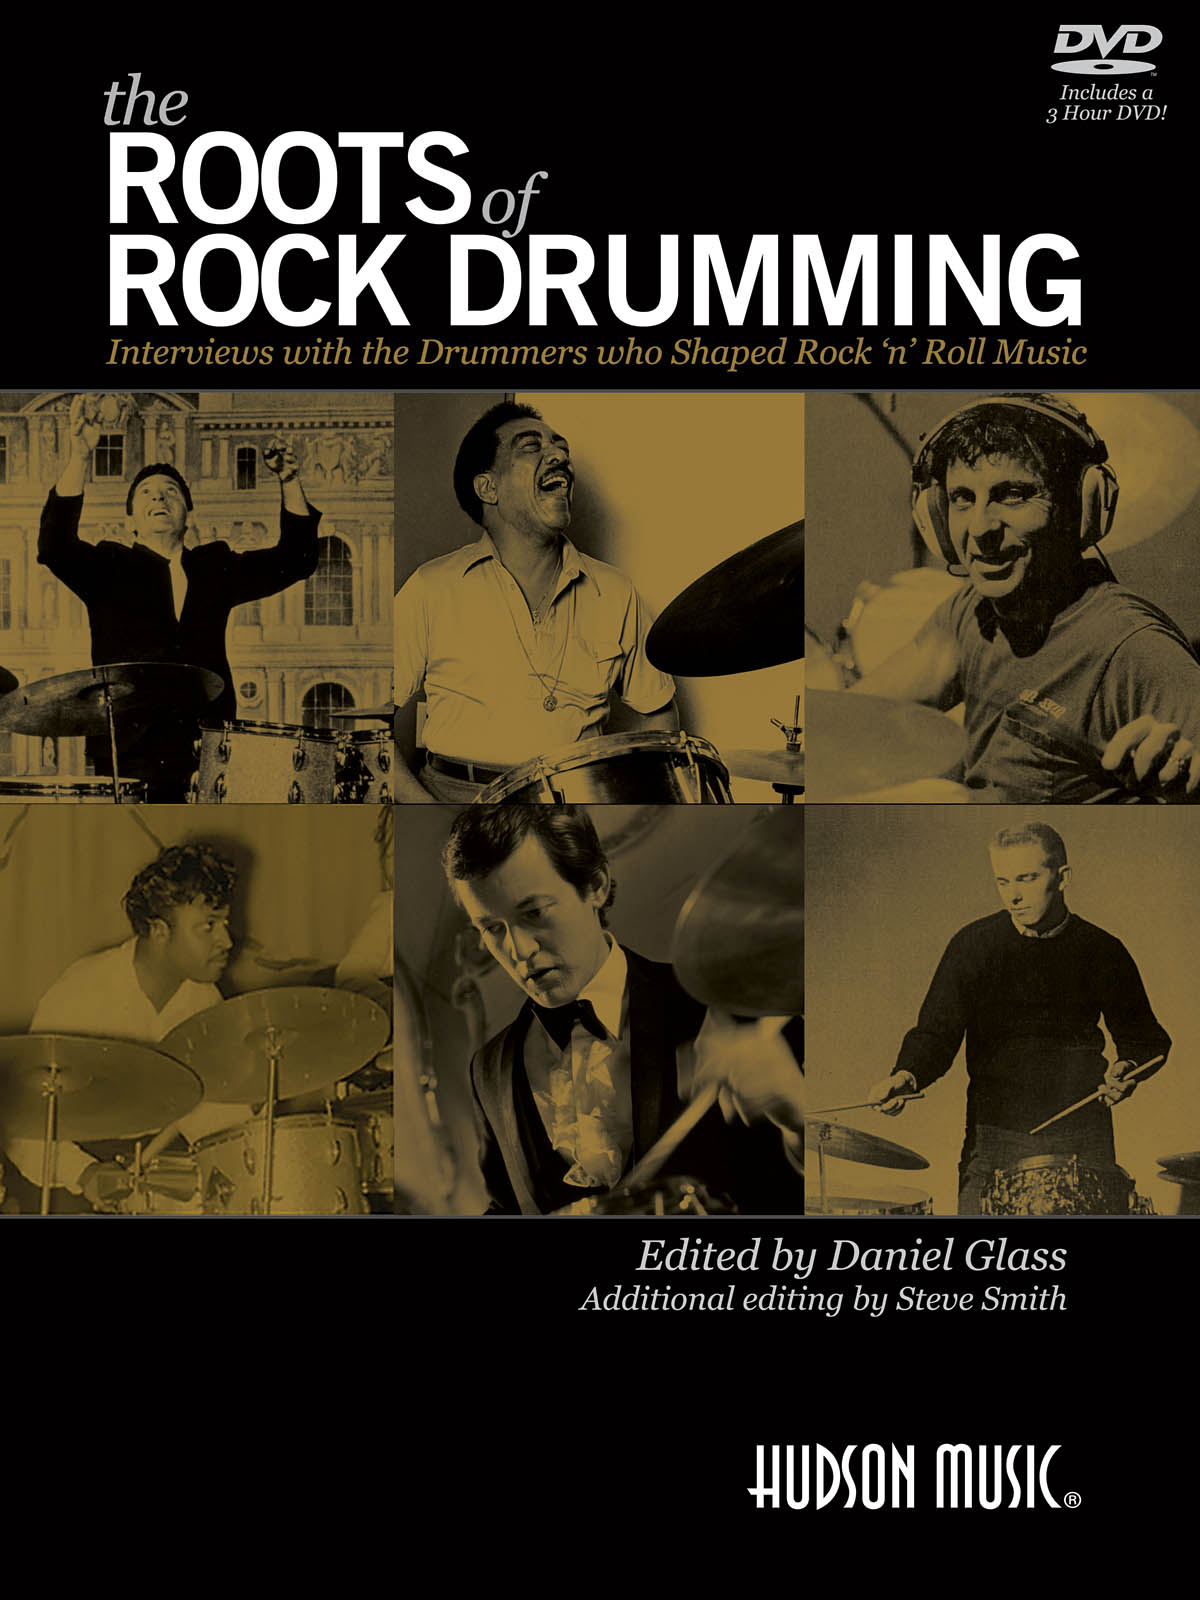 The Roots of Rock Drumming - Interviews with the Drummers Who Shaped Rock 'n' Roll Music - na bicí